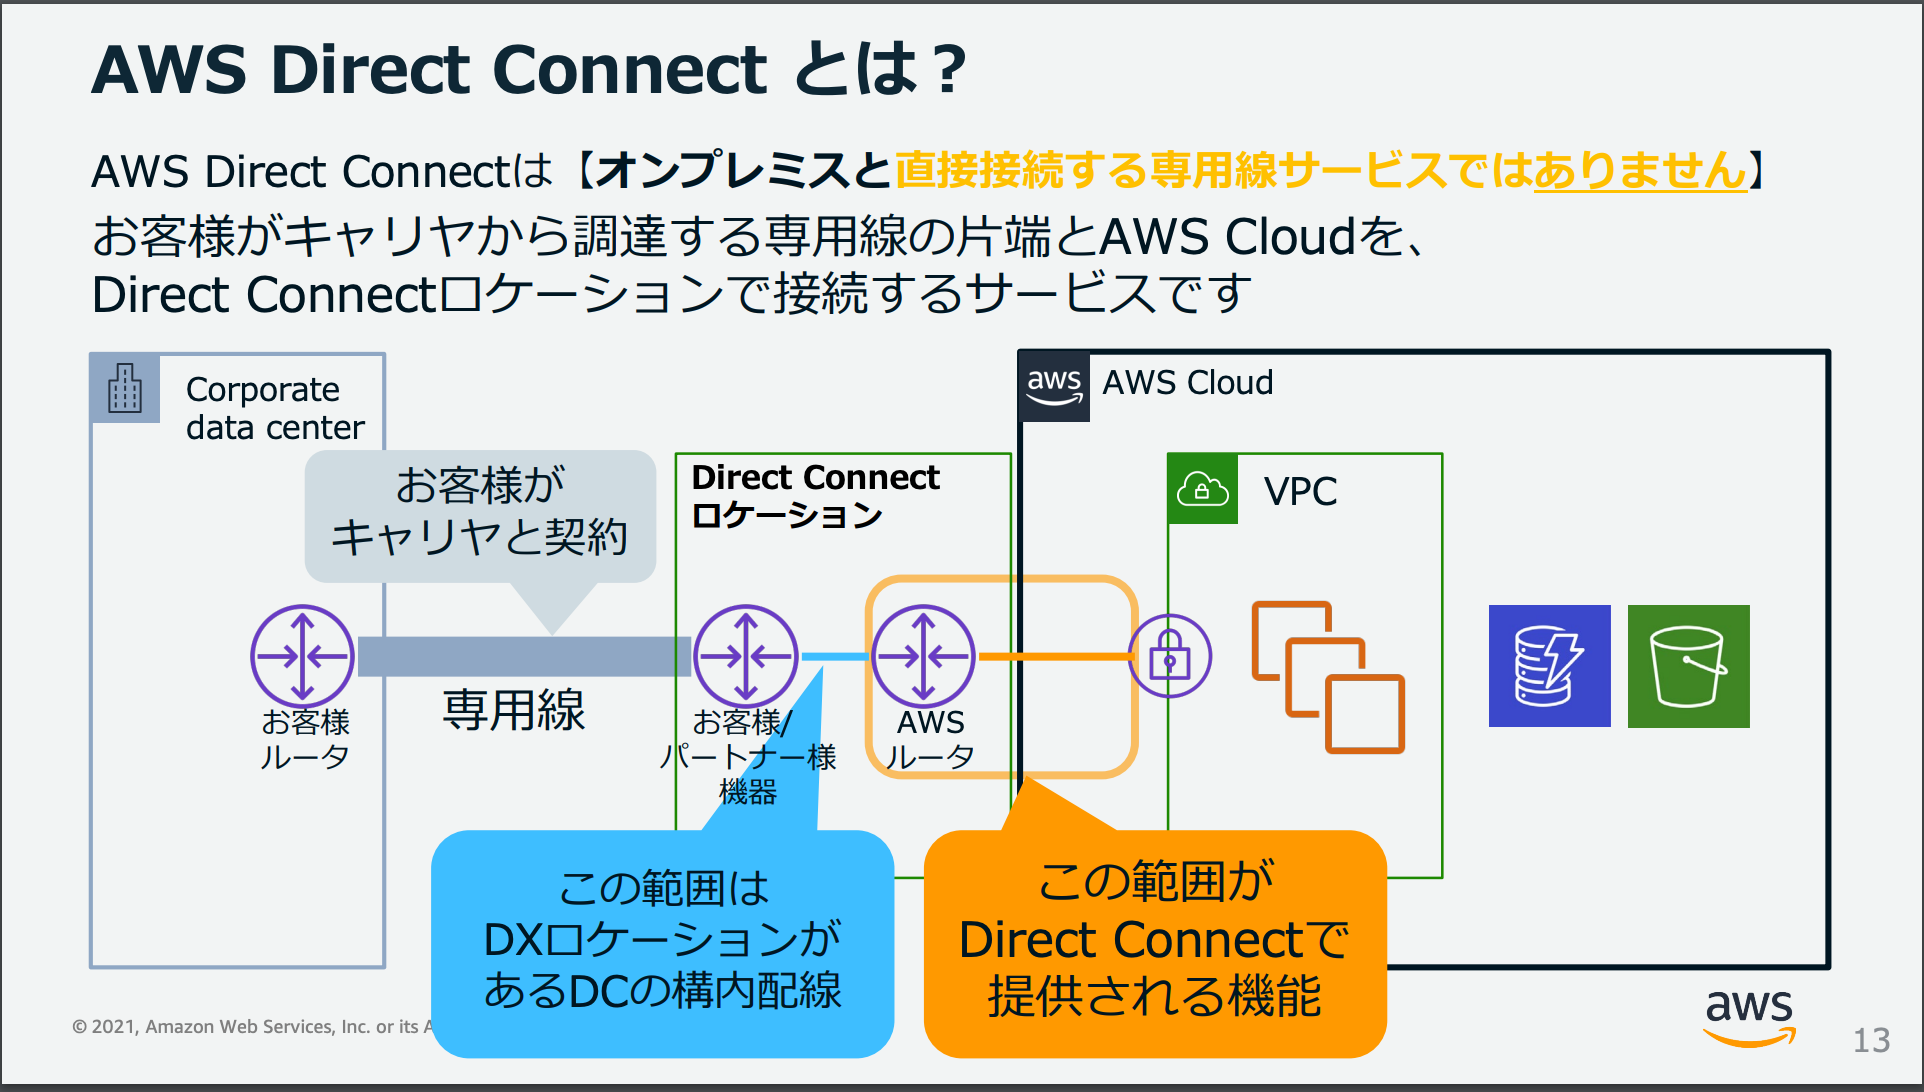 AWS Direct Connect とは